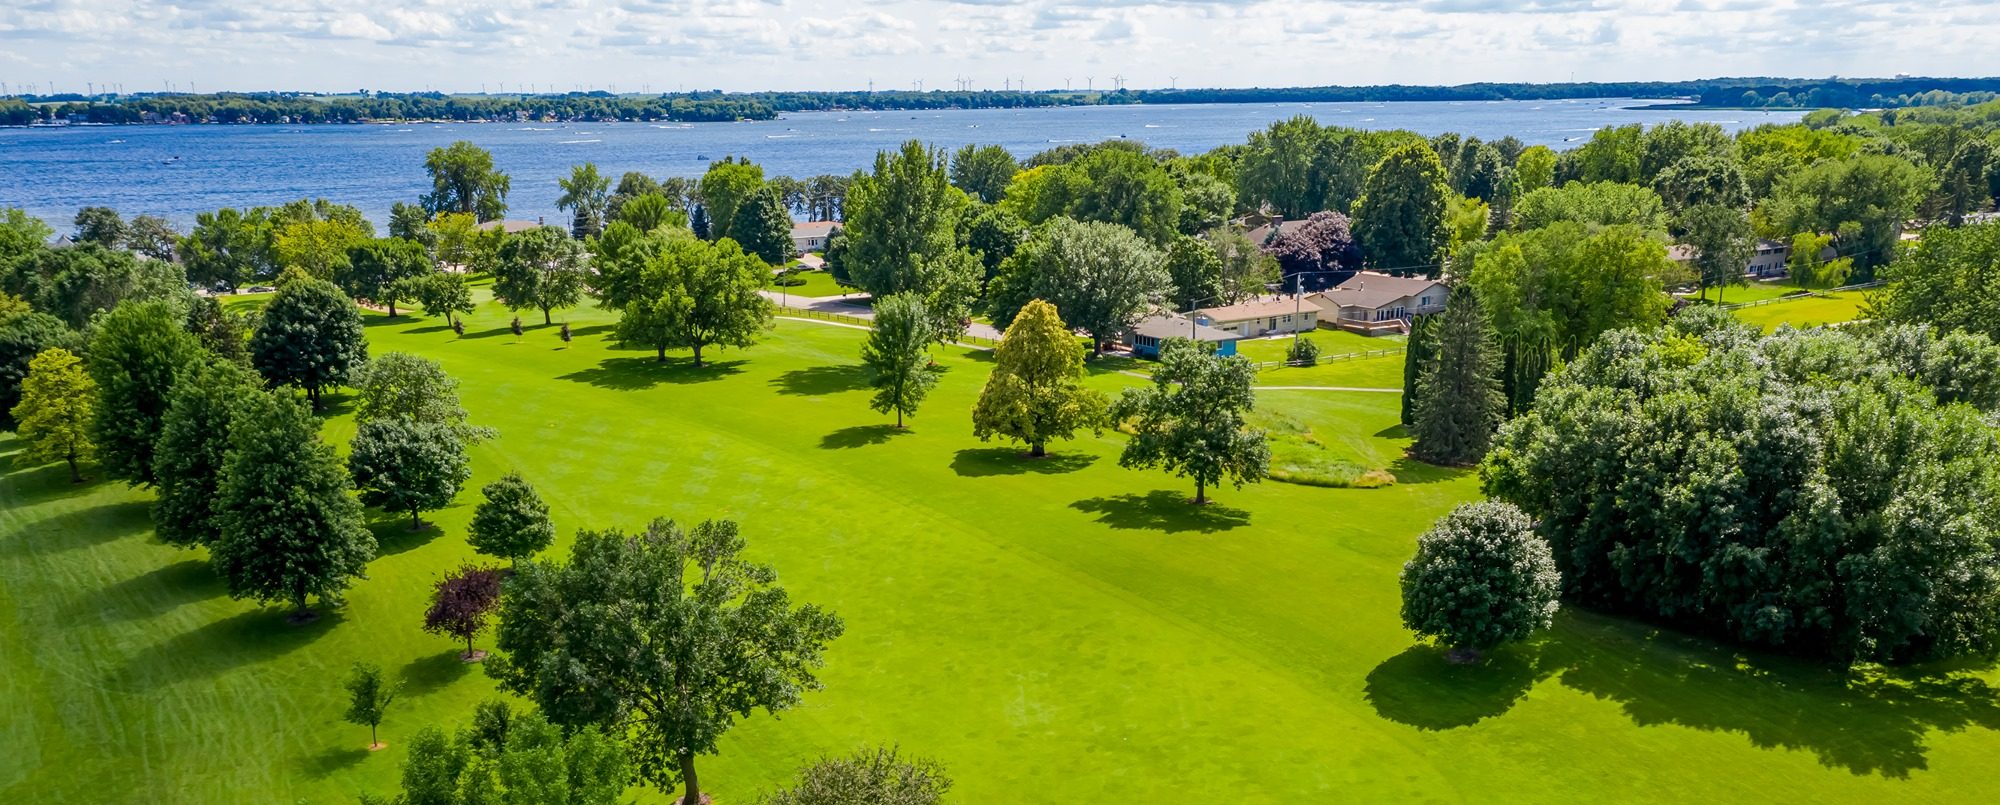 Overhead shot of golf course and lake in Clear Lake Iowa